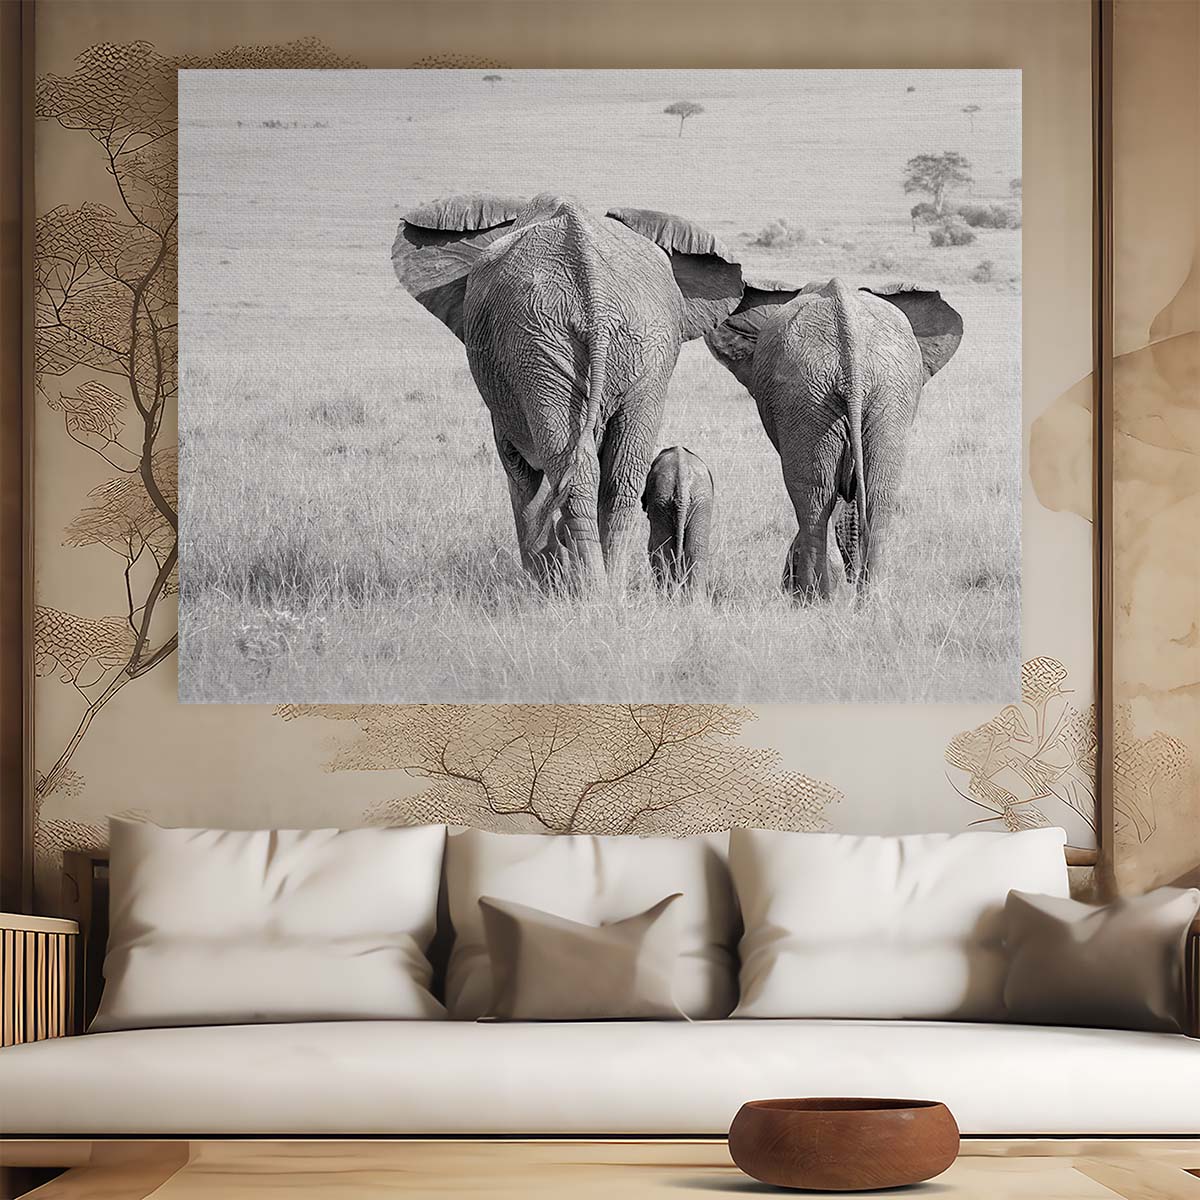 Elephant Family Love Safari Monochrome Wall Art by Luxuriance Designs. Made in USA.